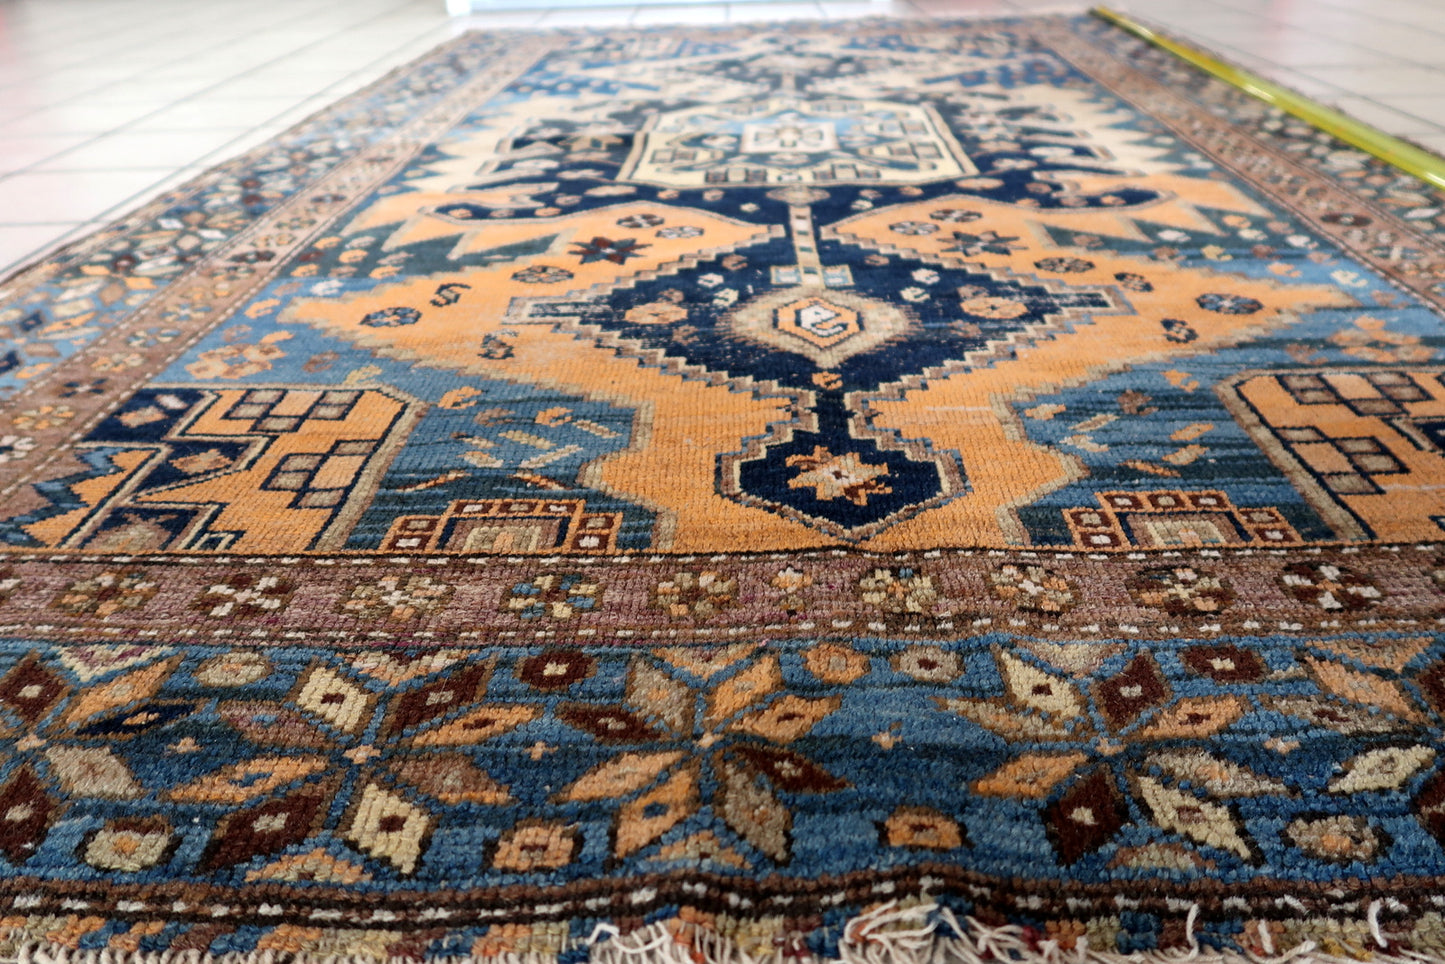 Close-up of historical significance on Handmade Antique Caucasian Shirvan Rug - Detailed view emphasizing the rug's historical significance and cultural heritage.